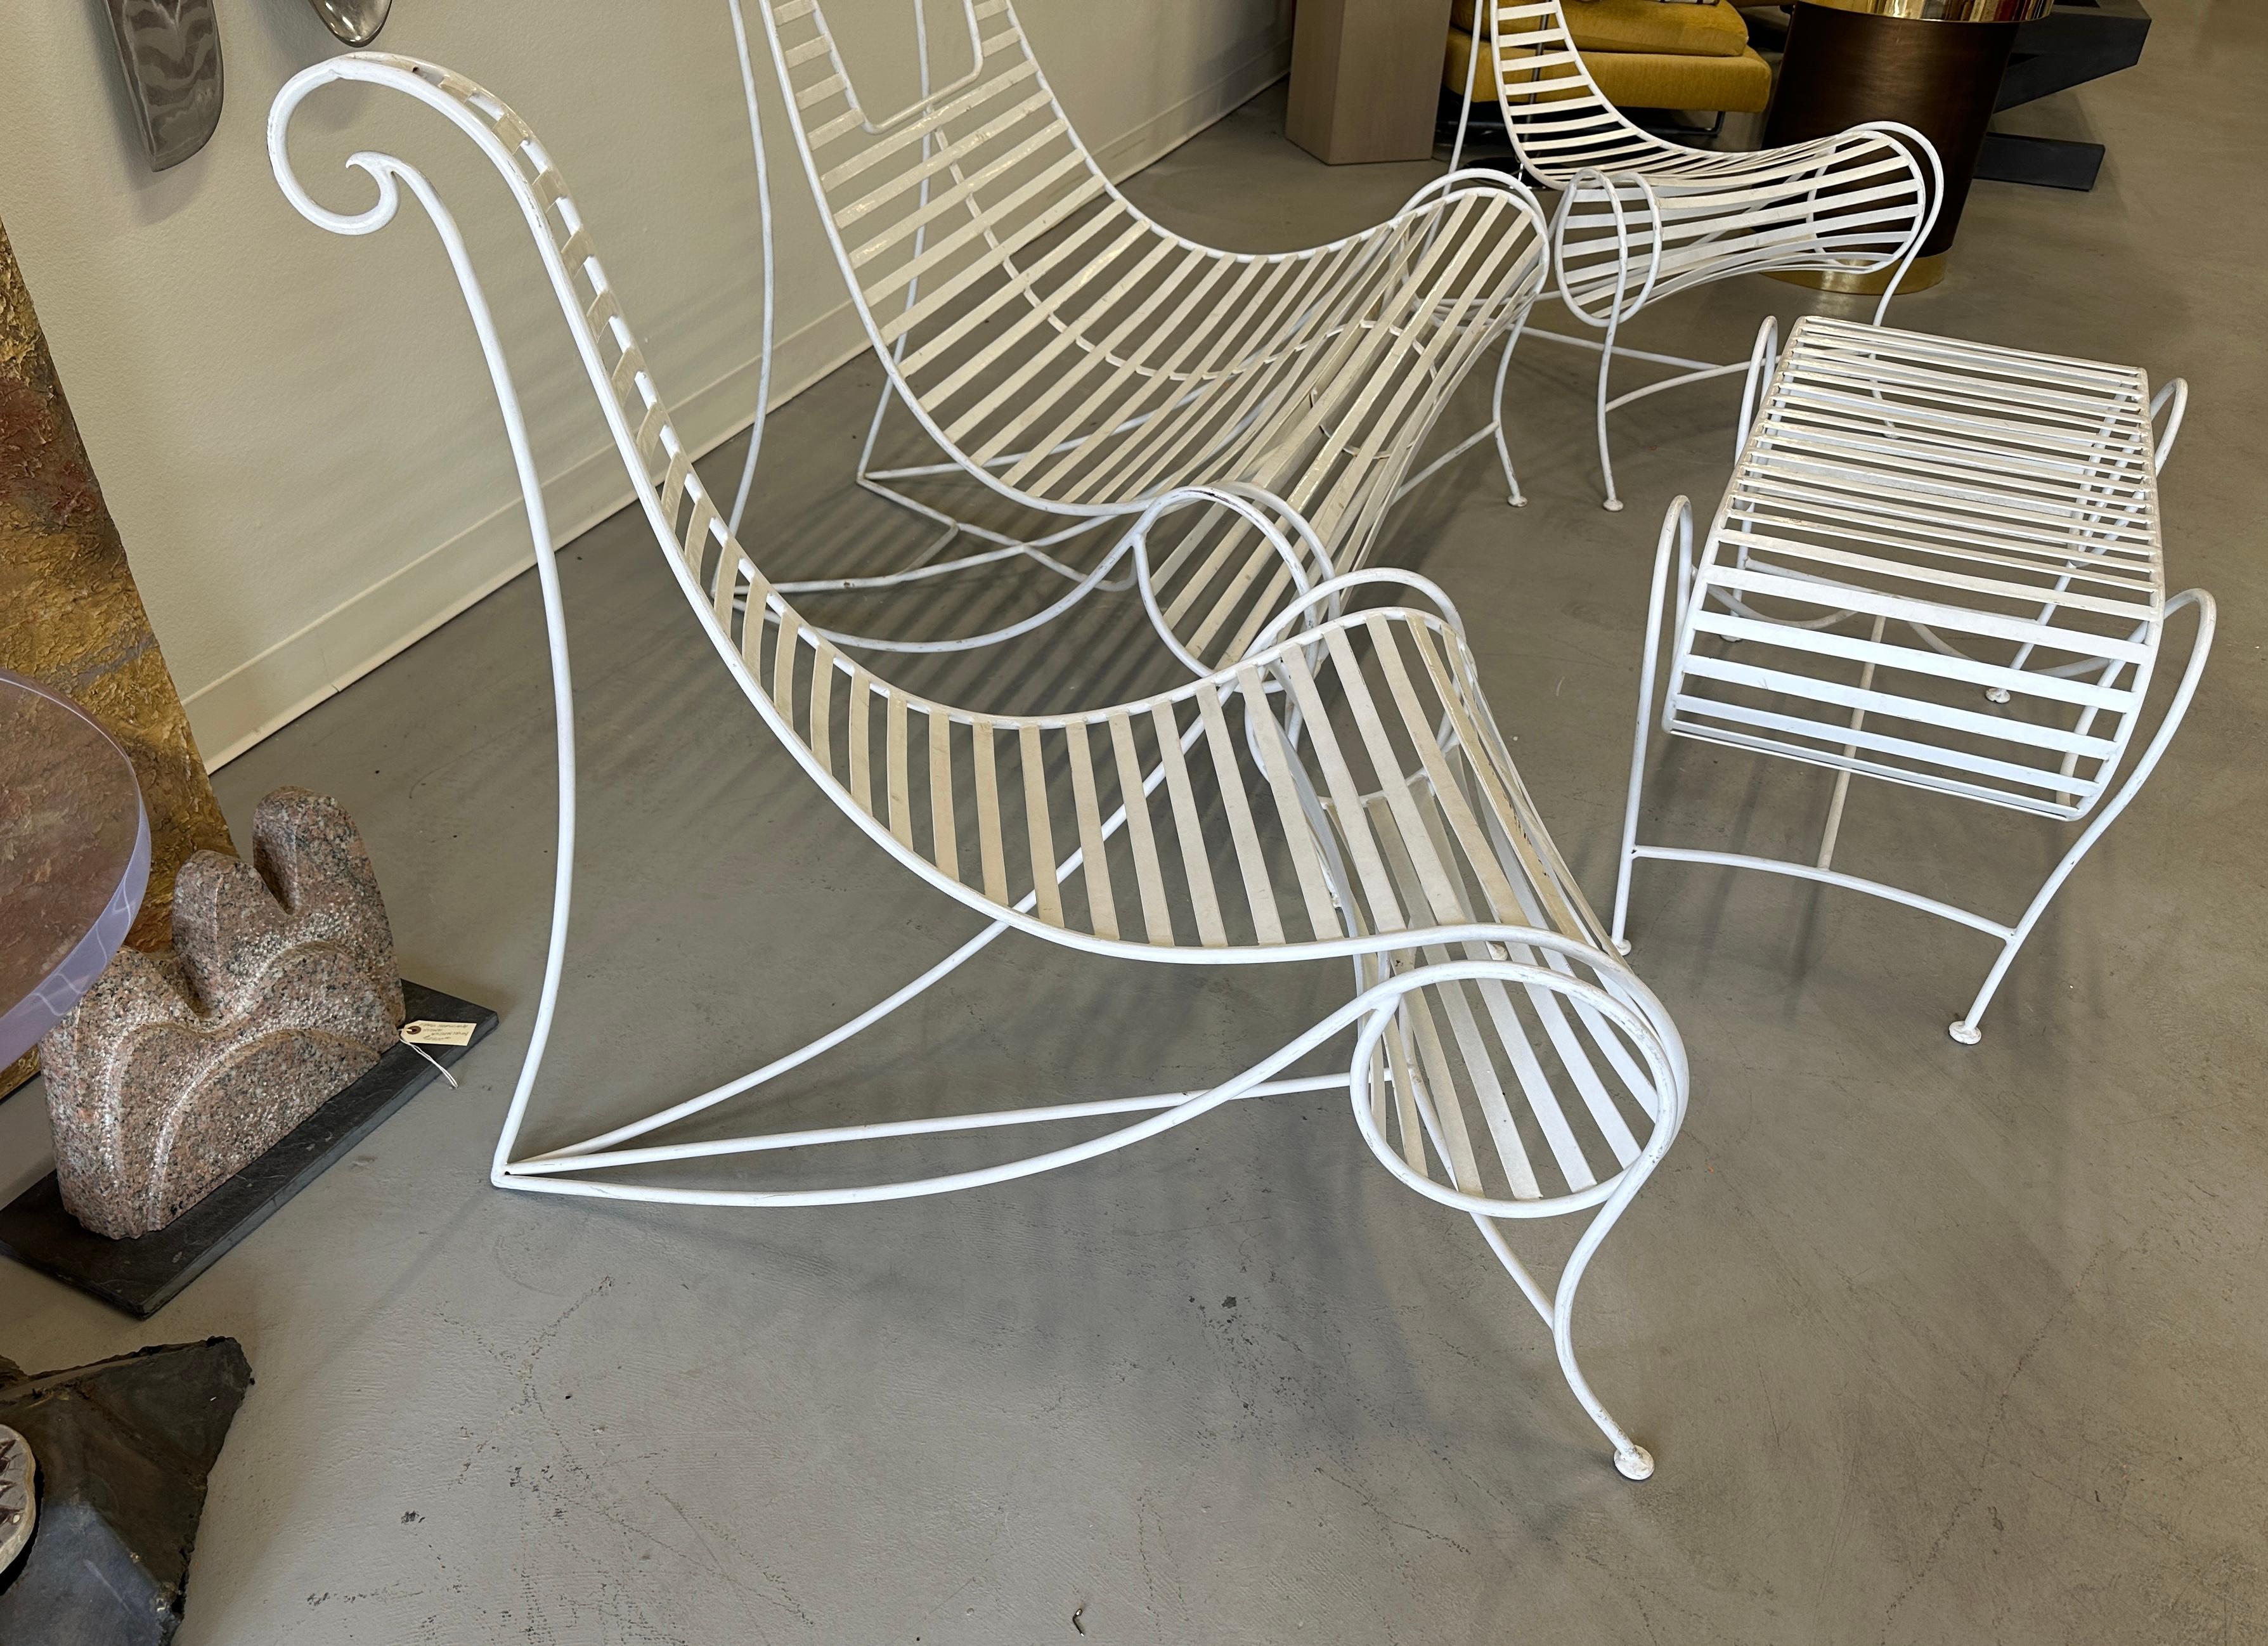 Wonderful 4 piece wrought iron set after a design by Andre Dubreuil. 2 lounge chairs, a settee and a small table. Great sculptural presence. In white paint. Some paint loss and wear please see the detailed photos. 
Table dimensions are 36 inches